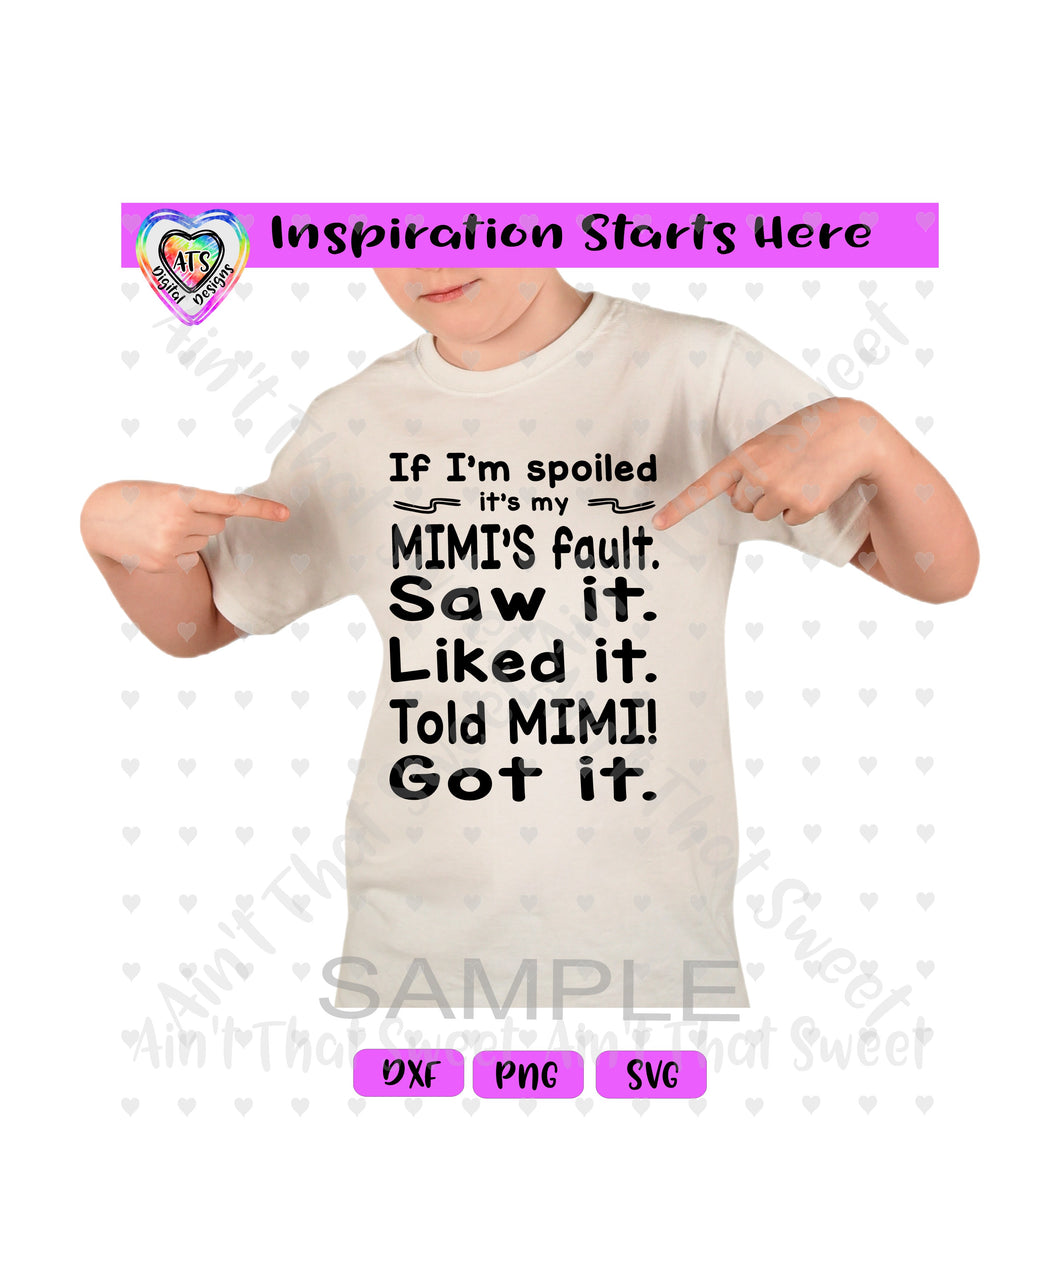 If I'm Spoiled | Mimi's Fault | Saw it. Liked it. Told Mimi! Got it - Transparent PNG SVG DXF - Silhouette, Cricut, ScanNCut